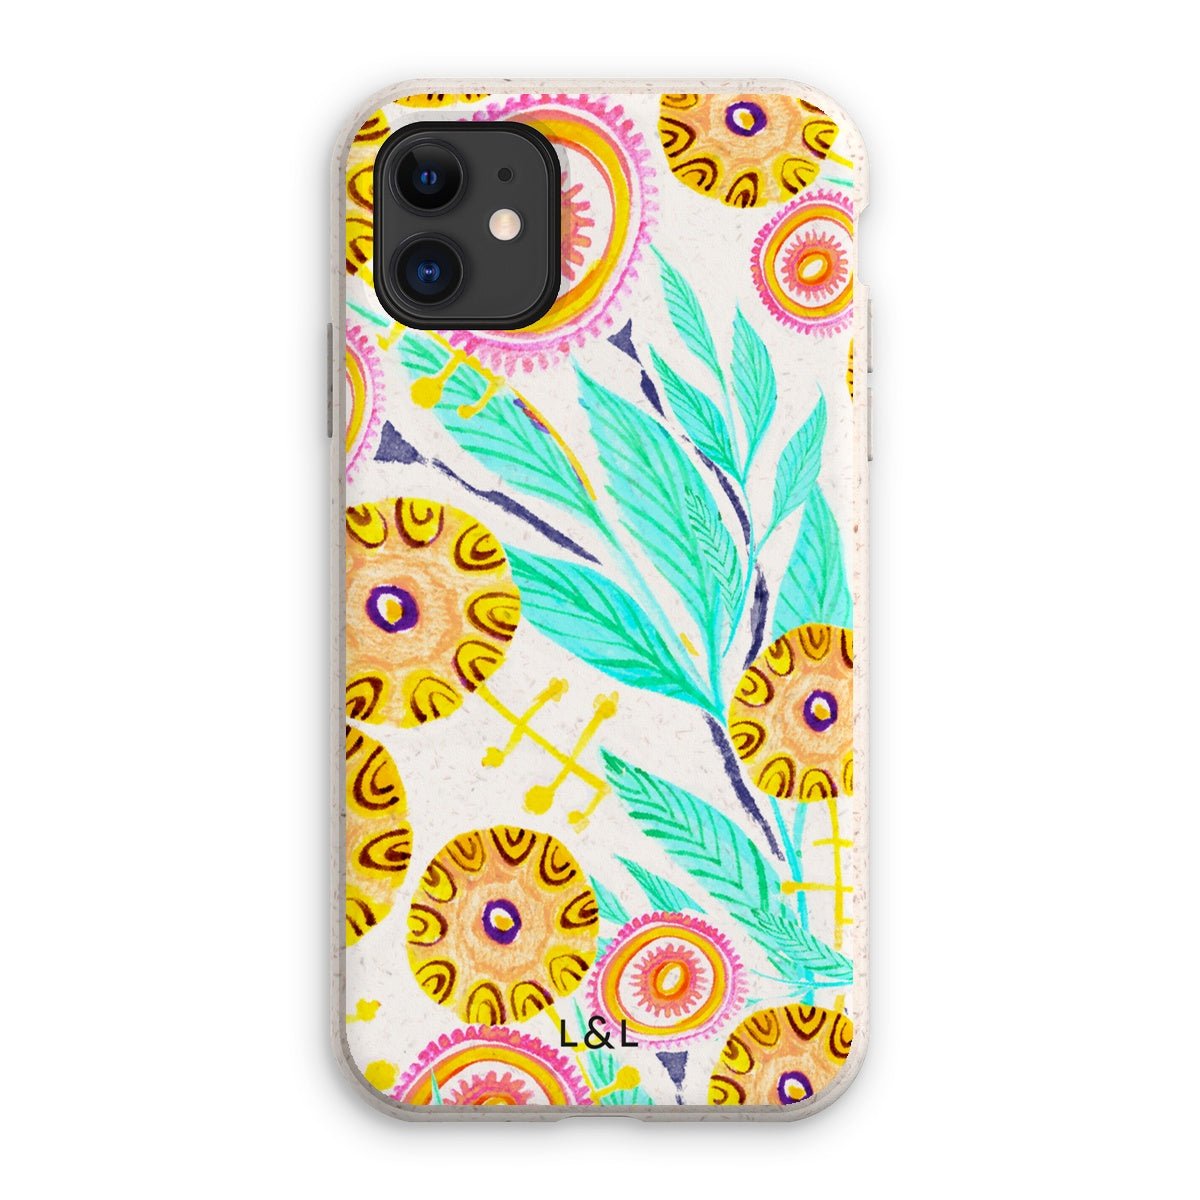 Floral Pattern Eco Phone Case - Loam & Lore